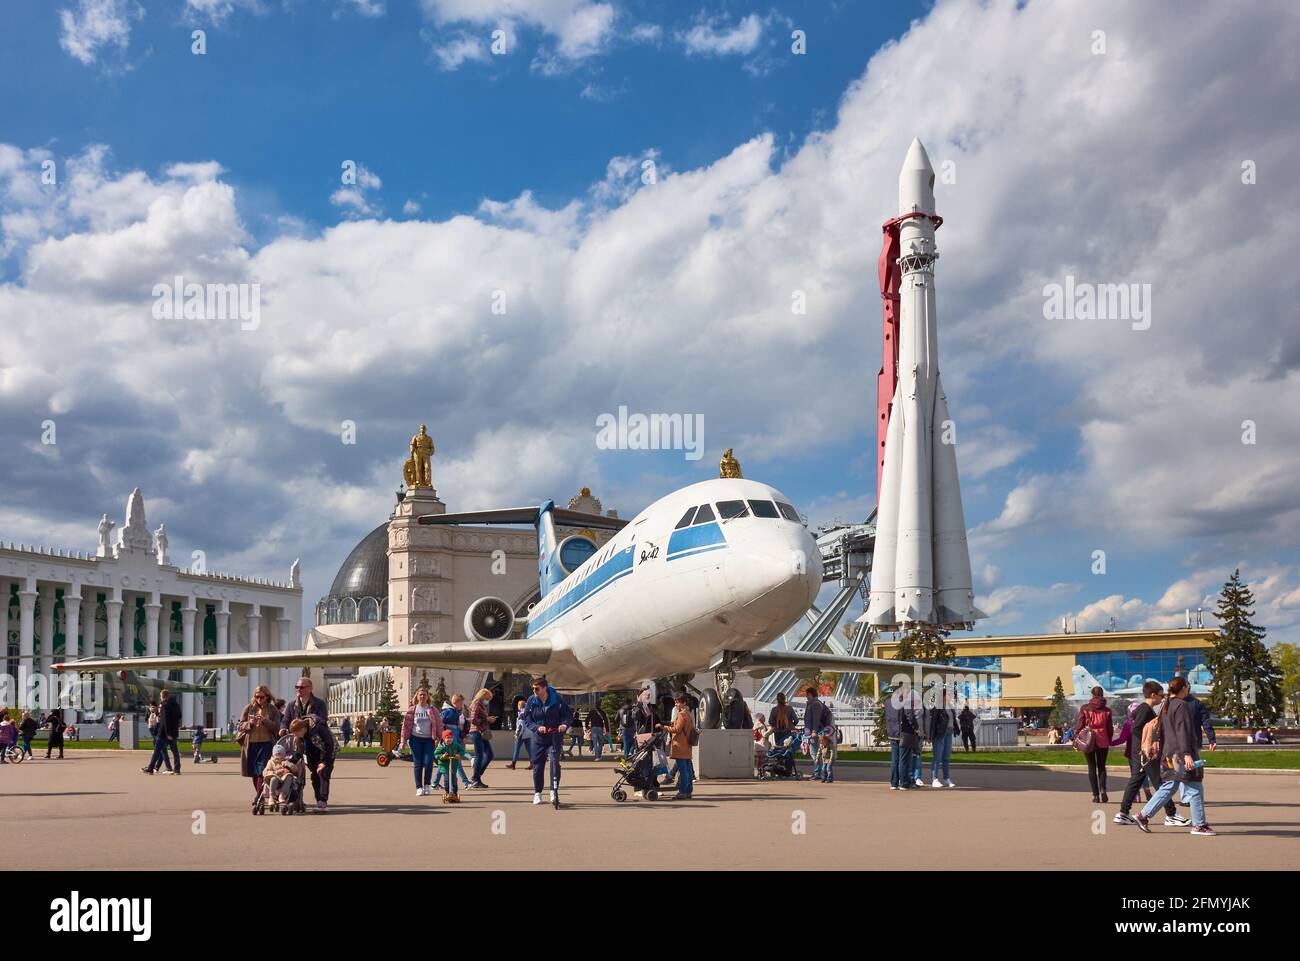 YAK 42 passenger plane, Vostok-1 rocket and pavilion Cosmos, exhibition of achievements of national economy: Moscow, Russia - May 07, 2021 Stock Photo